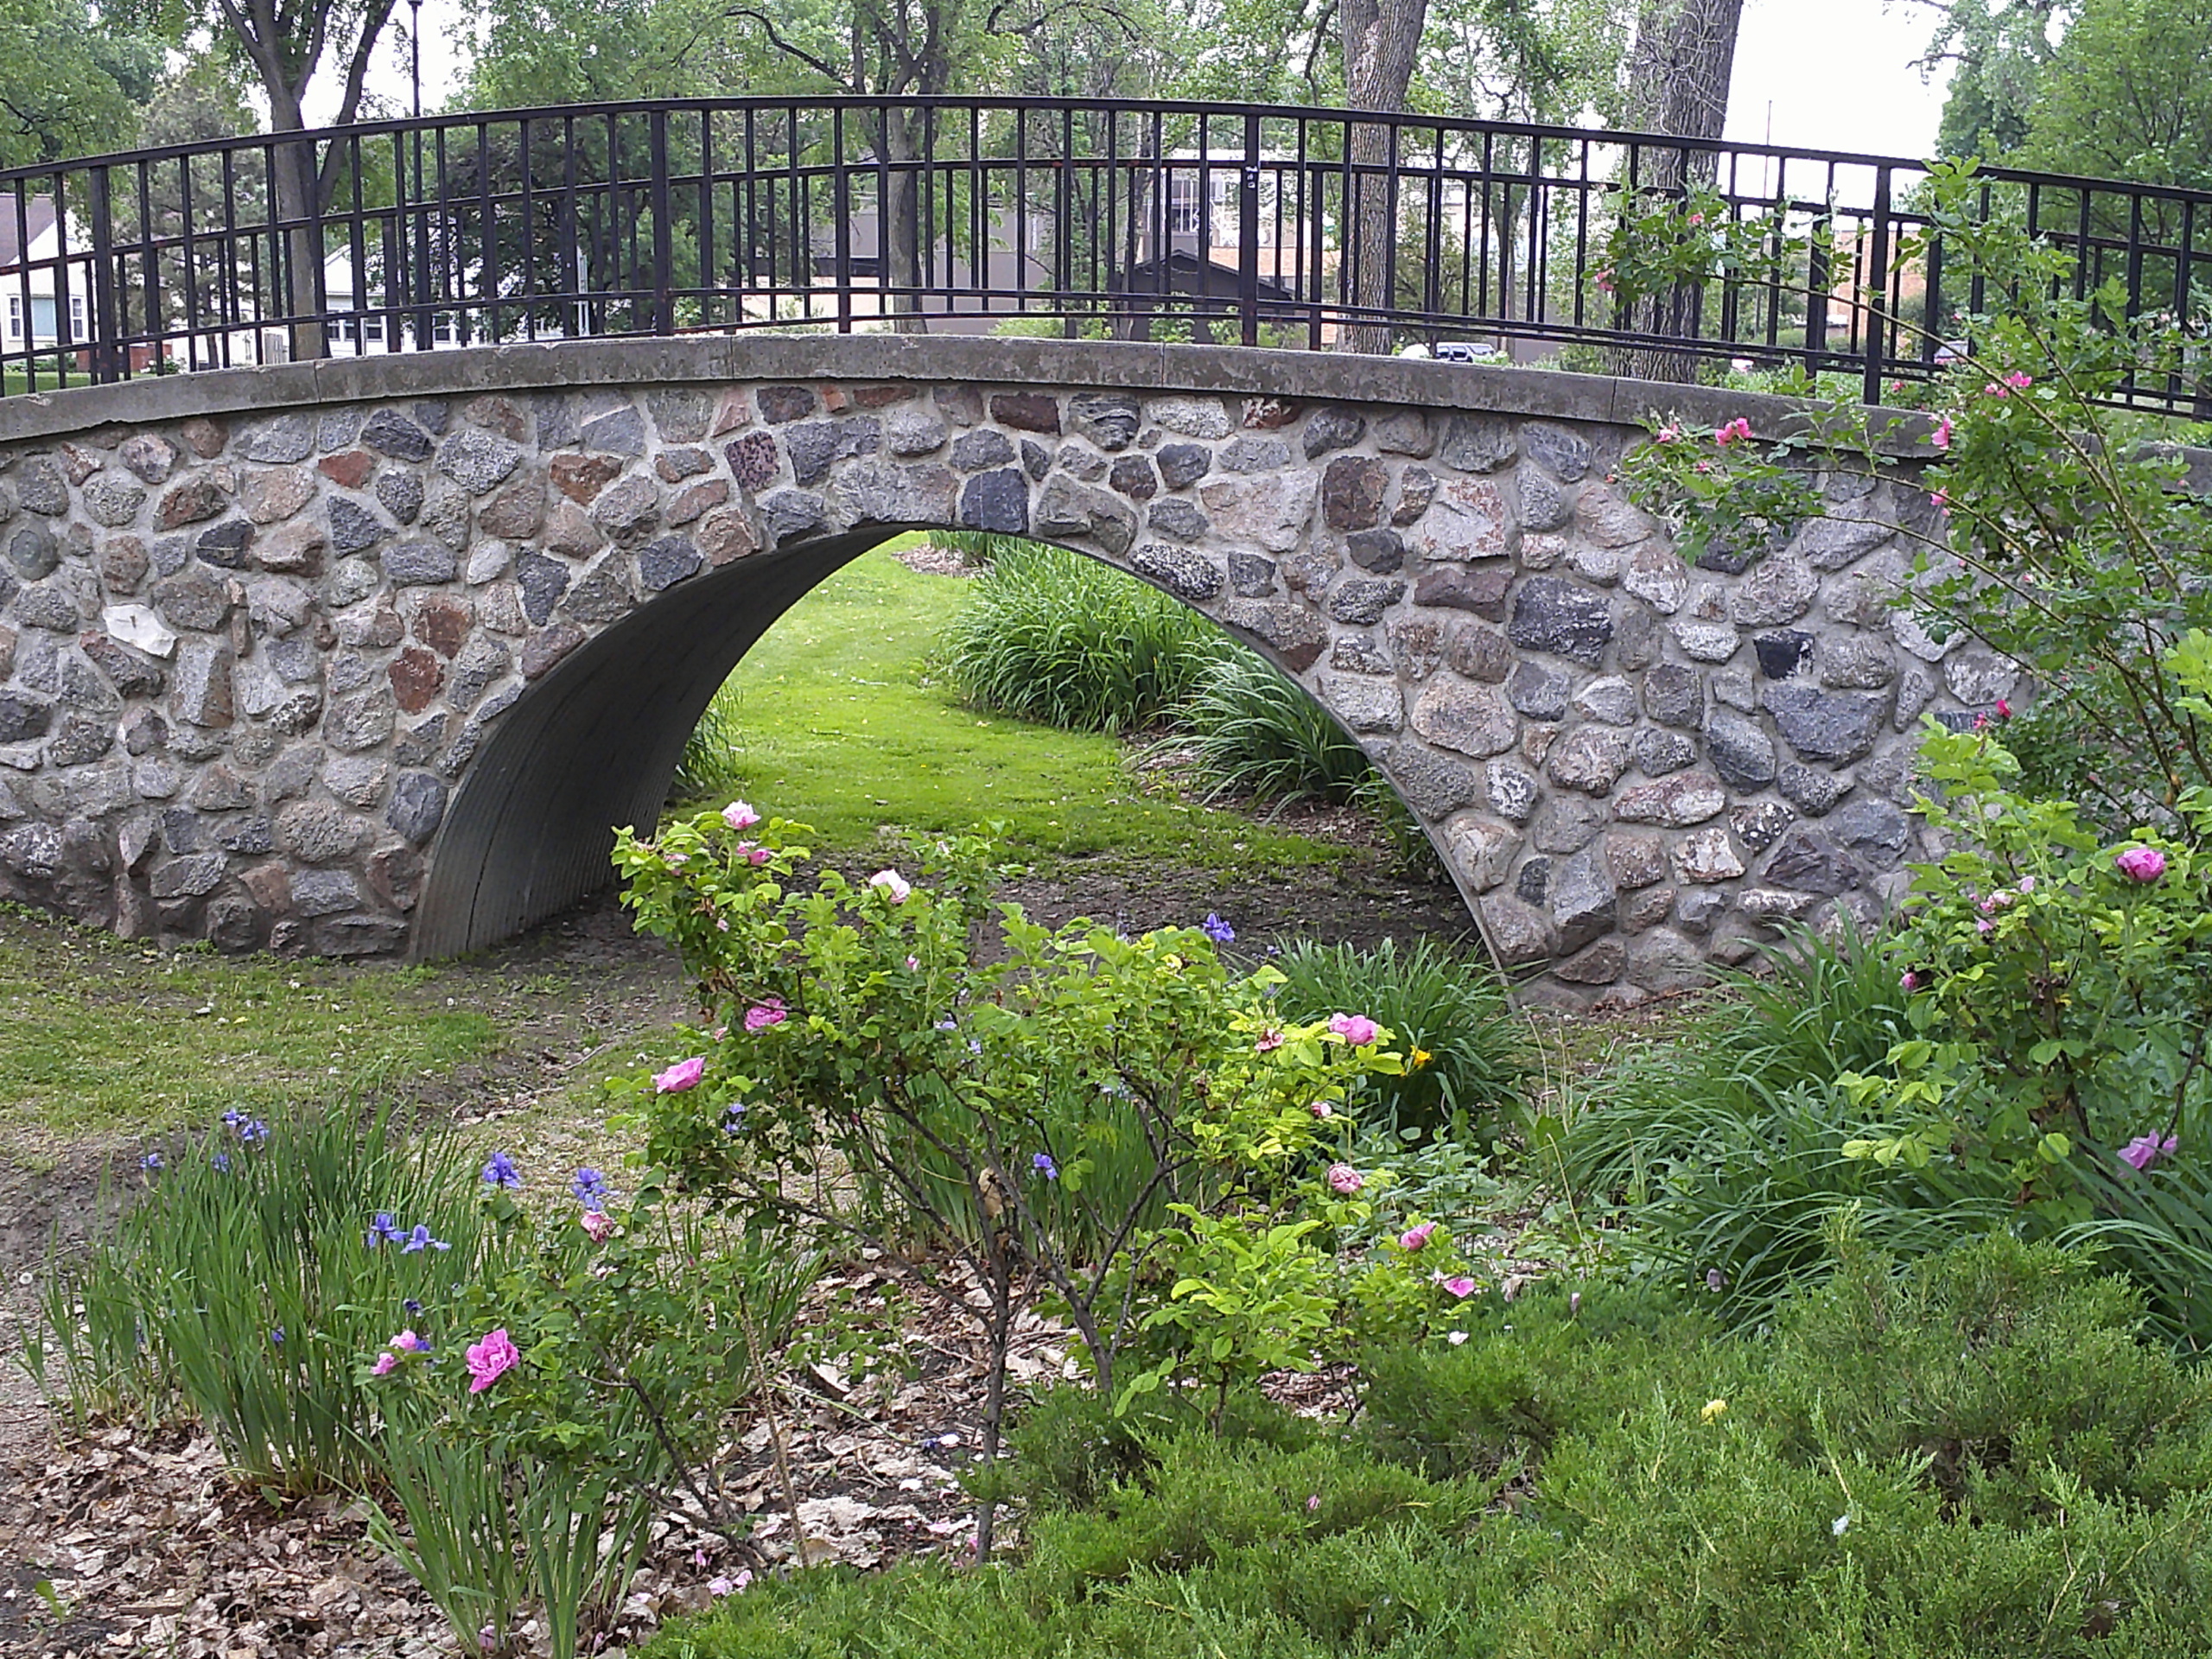 A stone bridge from University Park in Grand Forks